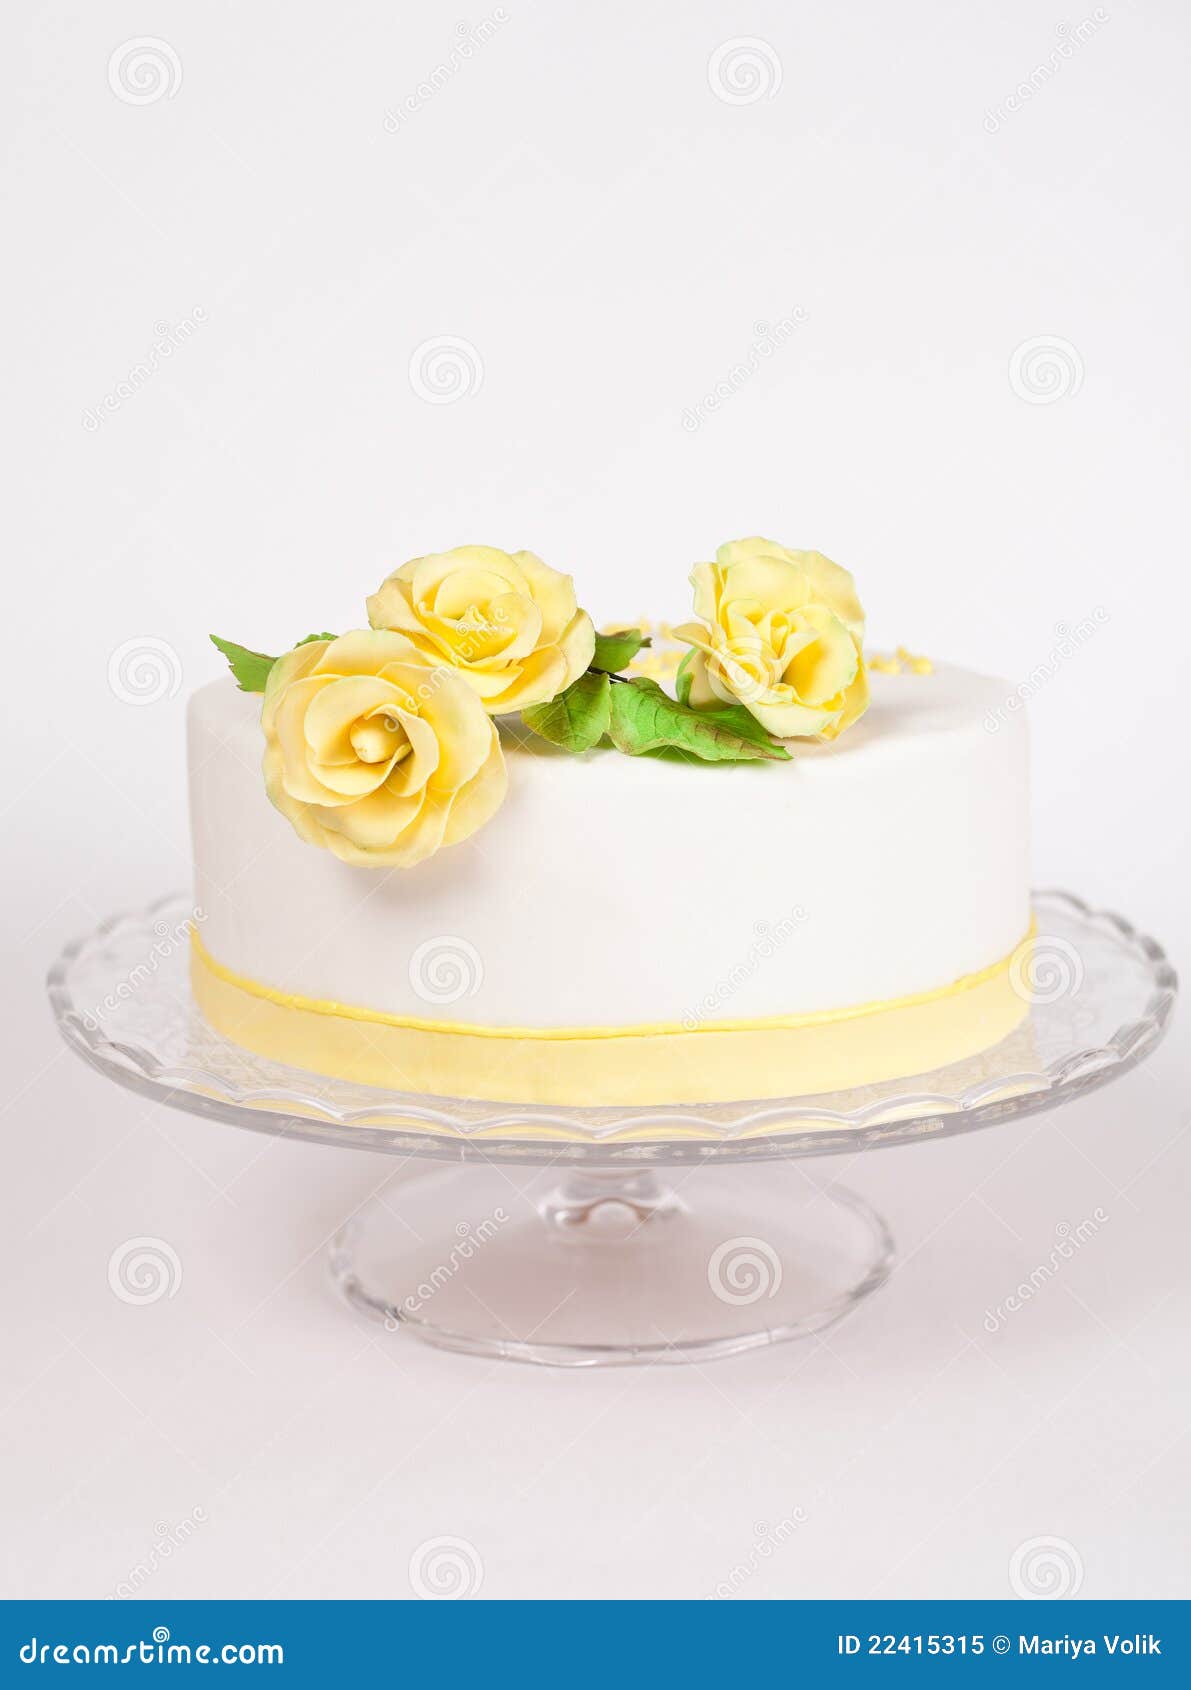 Cake with yellow roses stock image. Image of flowers - 22415315